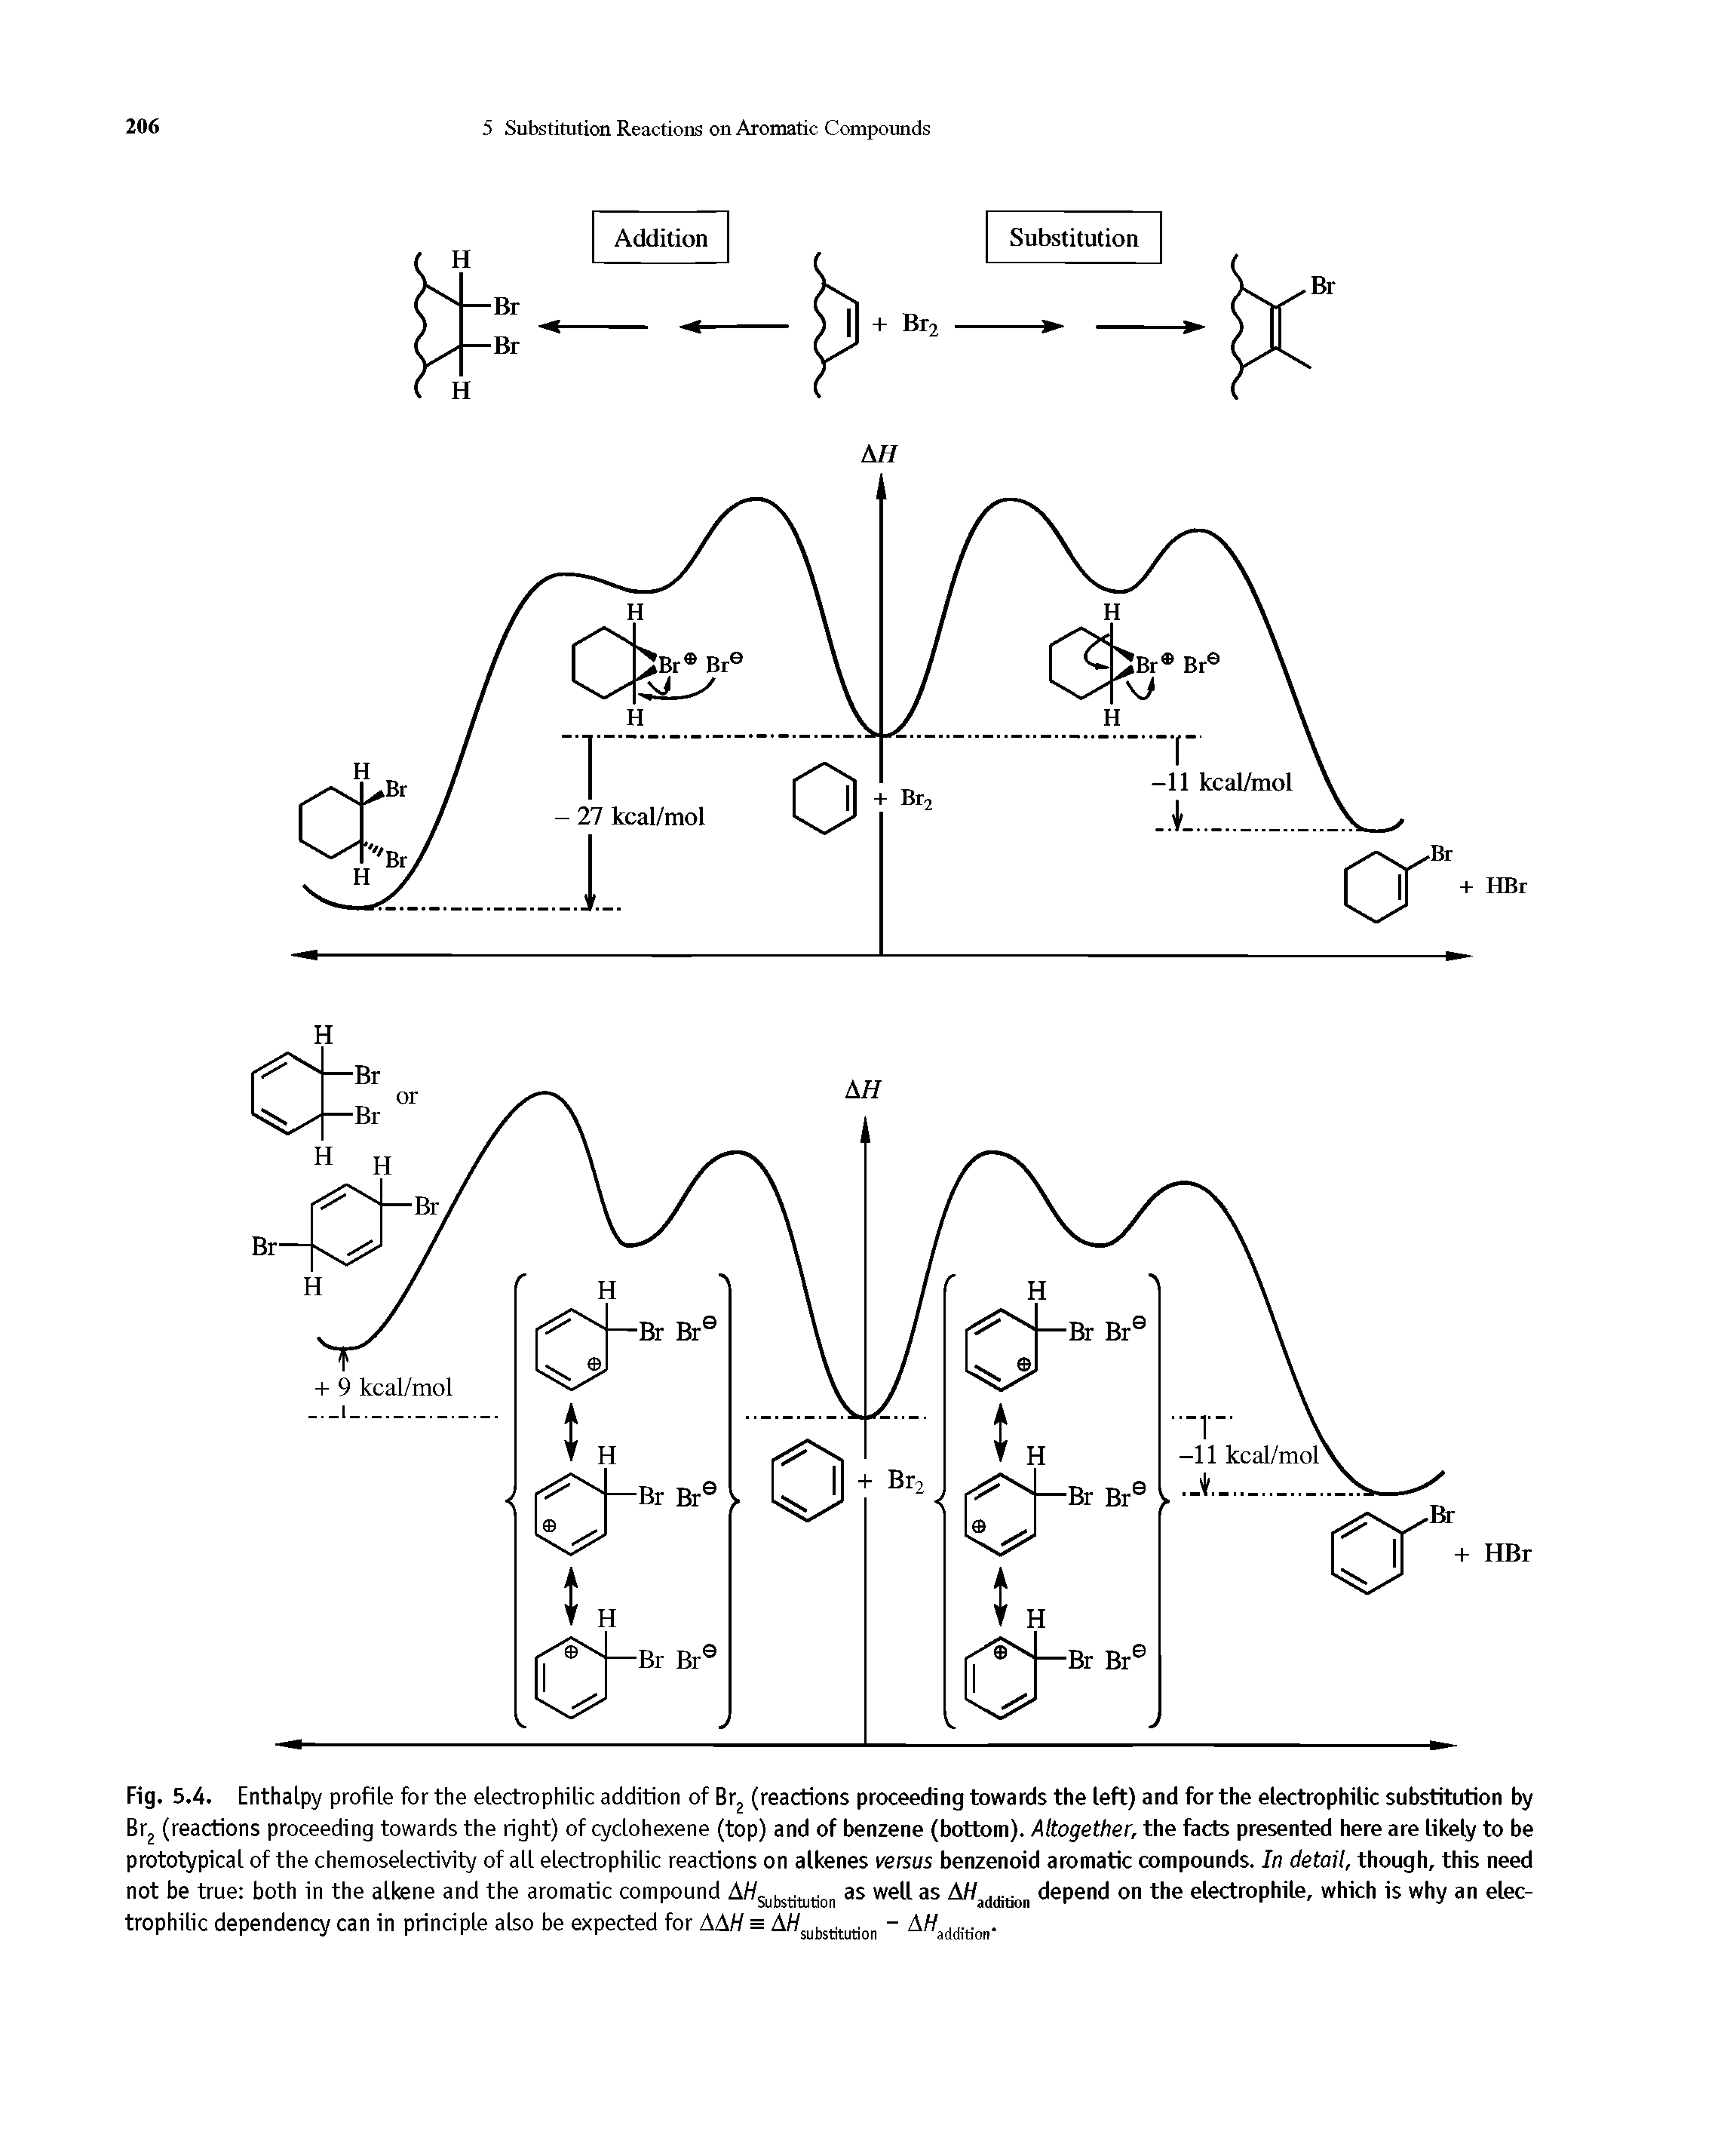 Fig. 5.4. Enthalpy profile for the electrophilic addition of Br2 (reactions proceeding towards the left) and for the electrophilic substitution by Br2 (reactions proceeding towards the right) of cyclohexene (top) and of benzene (bottom). Altogether, the facts presented here are likely to be prototypical of the chemoselectivity of all electrophilic reactions on alkenes versus benzenoid aromatic compounds. In detail, though, this need not be true both in the alkene and the aromatic compound AWSubstitution as well as AWadditio depend on the electrophile, which is why an electrophilic dependency can in principle also be expected for AAH = AWsubstitution - A//a(1(l t. ol. ...